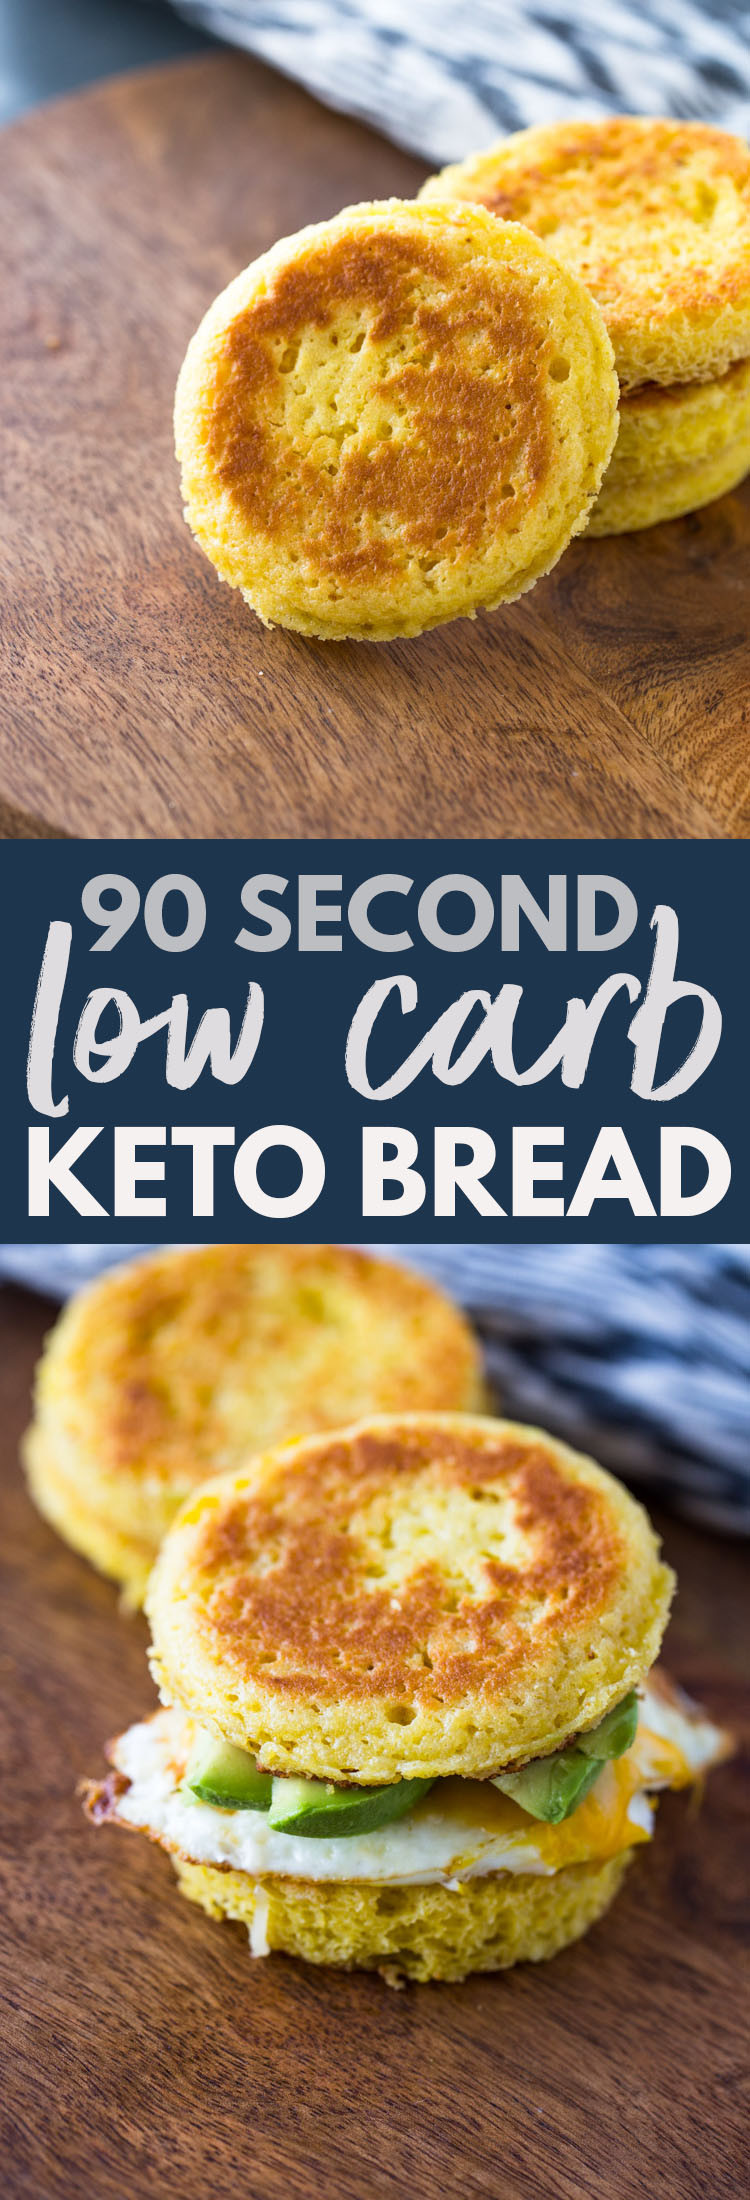 3 Ingredient 90 Second Keto Bread
 90 Second Microwavable Low Carb Keto Bread